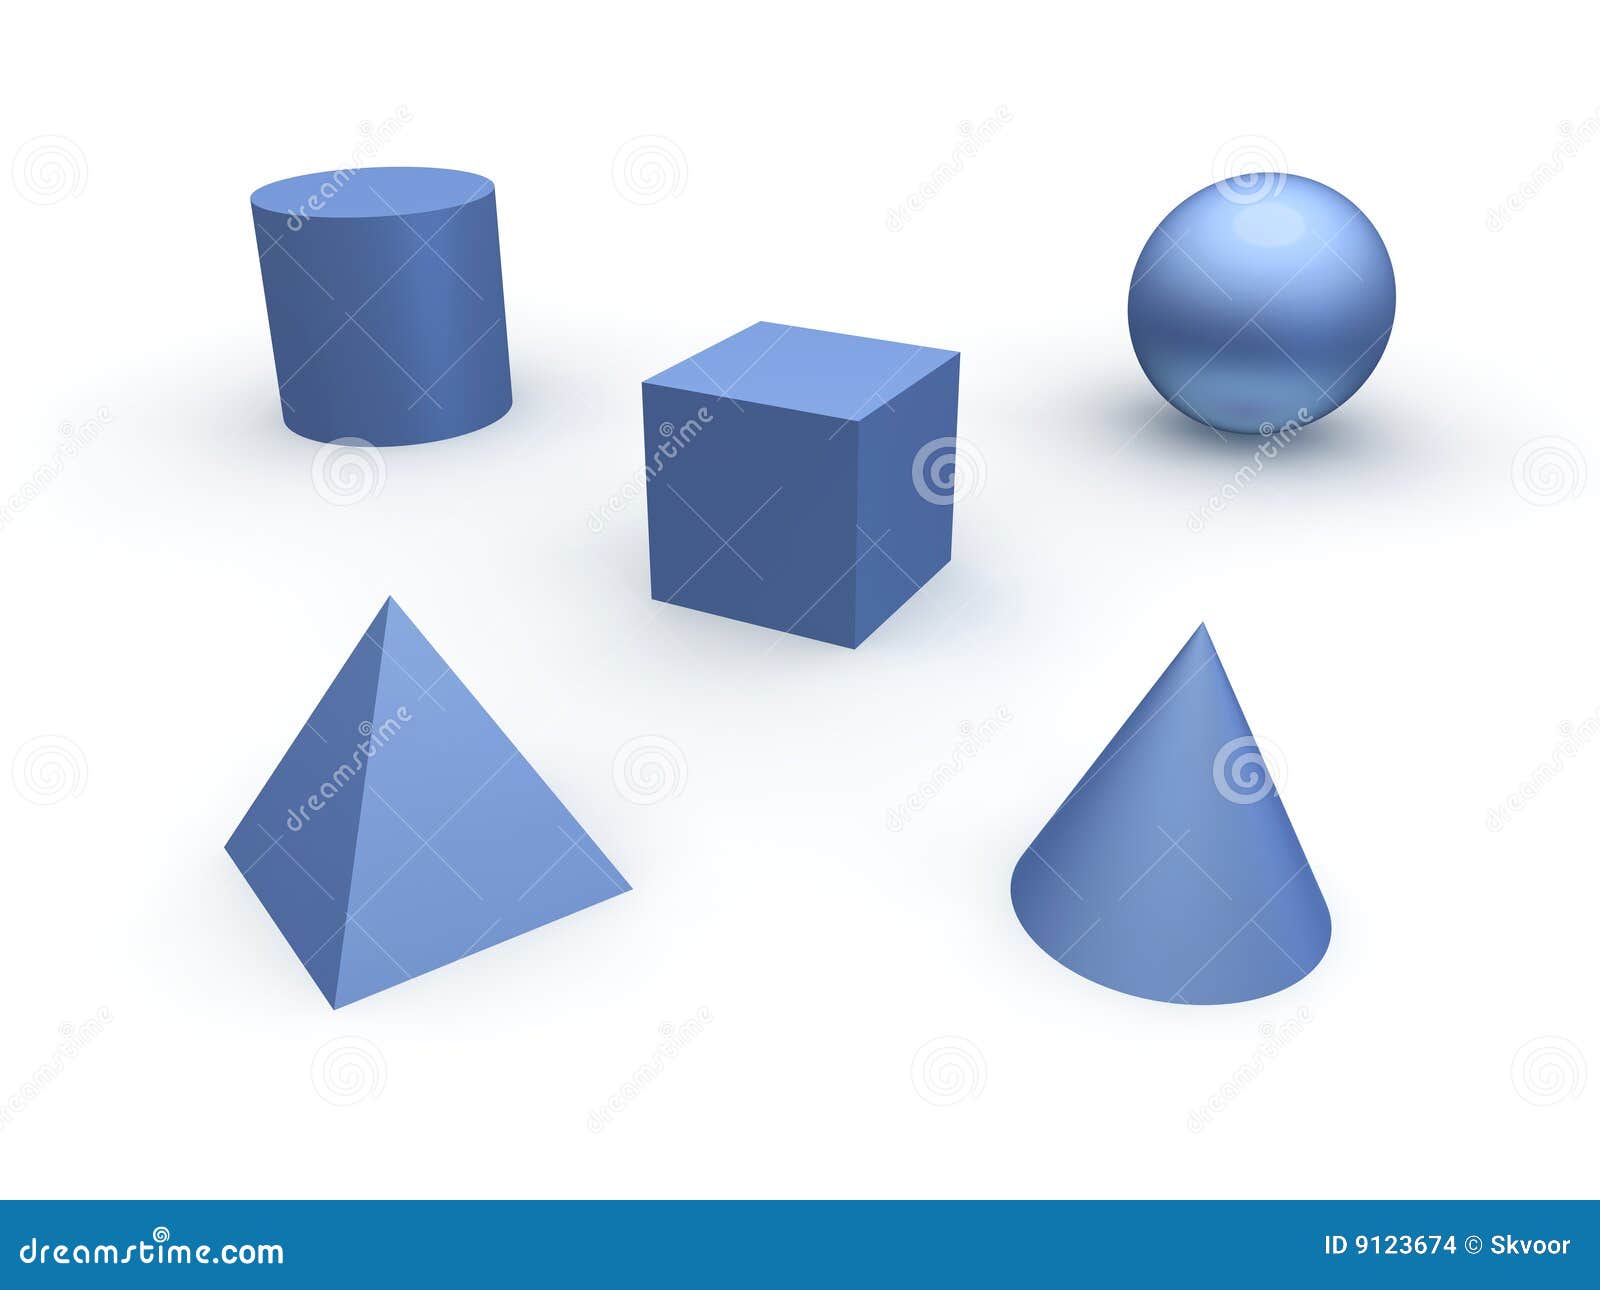 3d basic objects